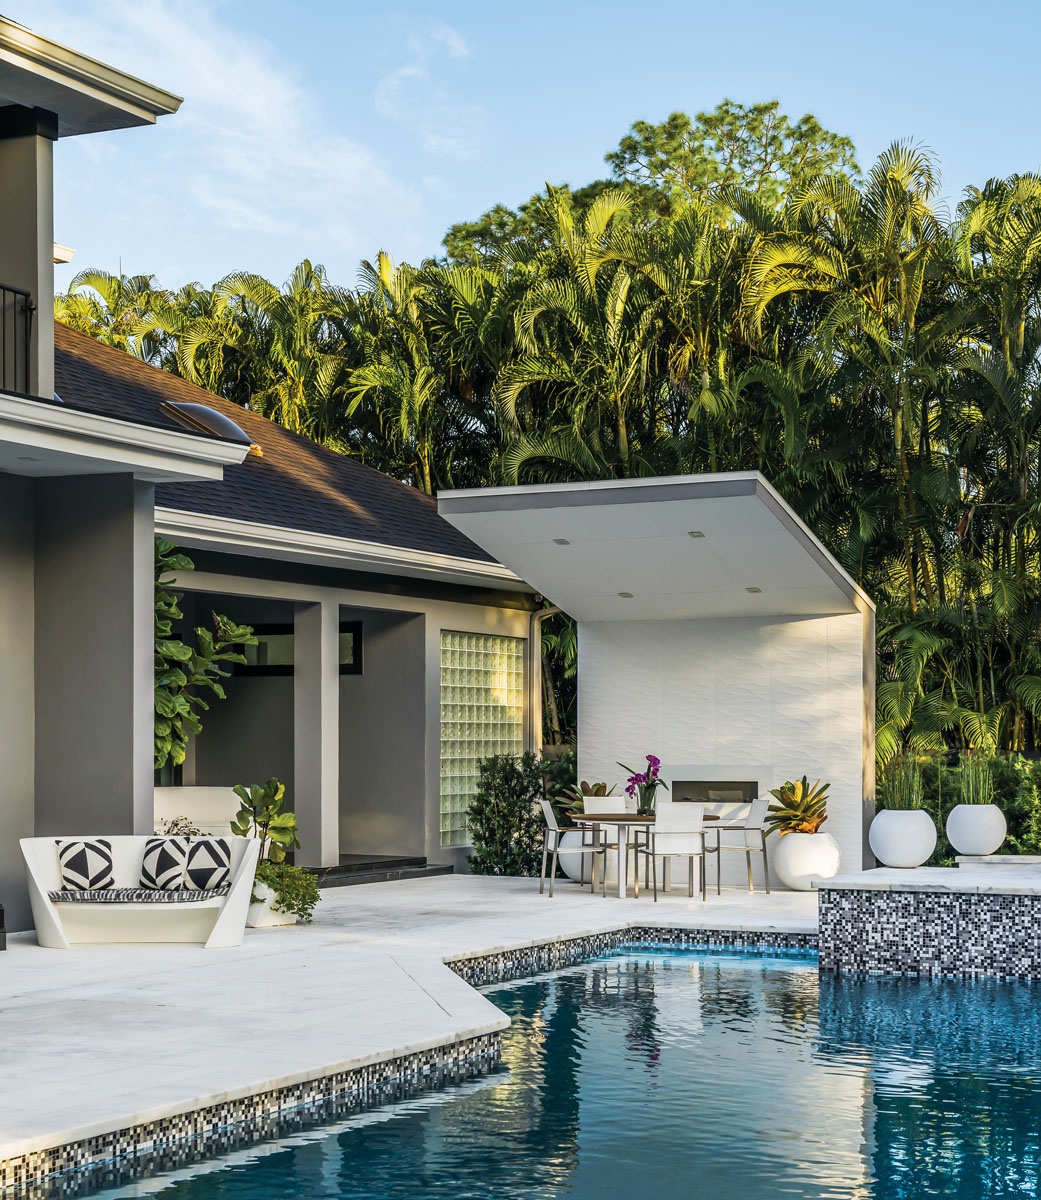 The black, white, and grey Italian mosaic pool tile connects the home’s interior palette to the outdoor living space. Idelson says it’s his favorite weekend retreat. “When I’m on the patio, I’m in another world,” he says. “I have my cup of coffee, read a book, and listen to jazz.”